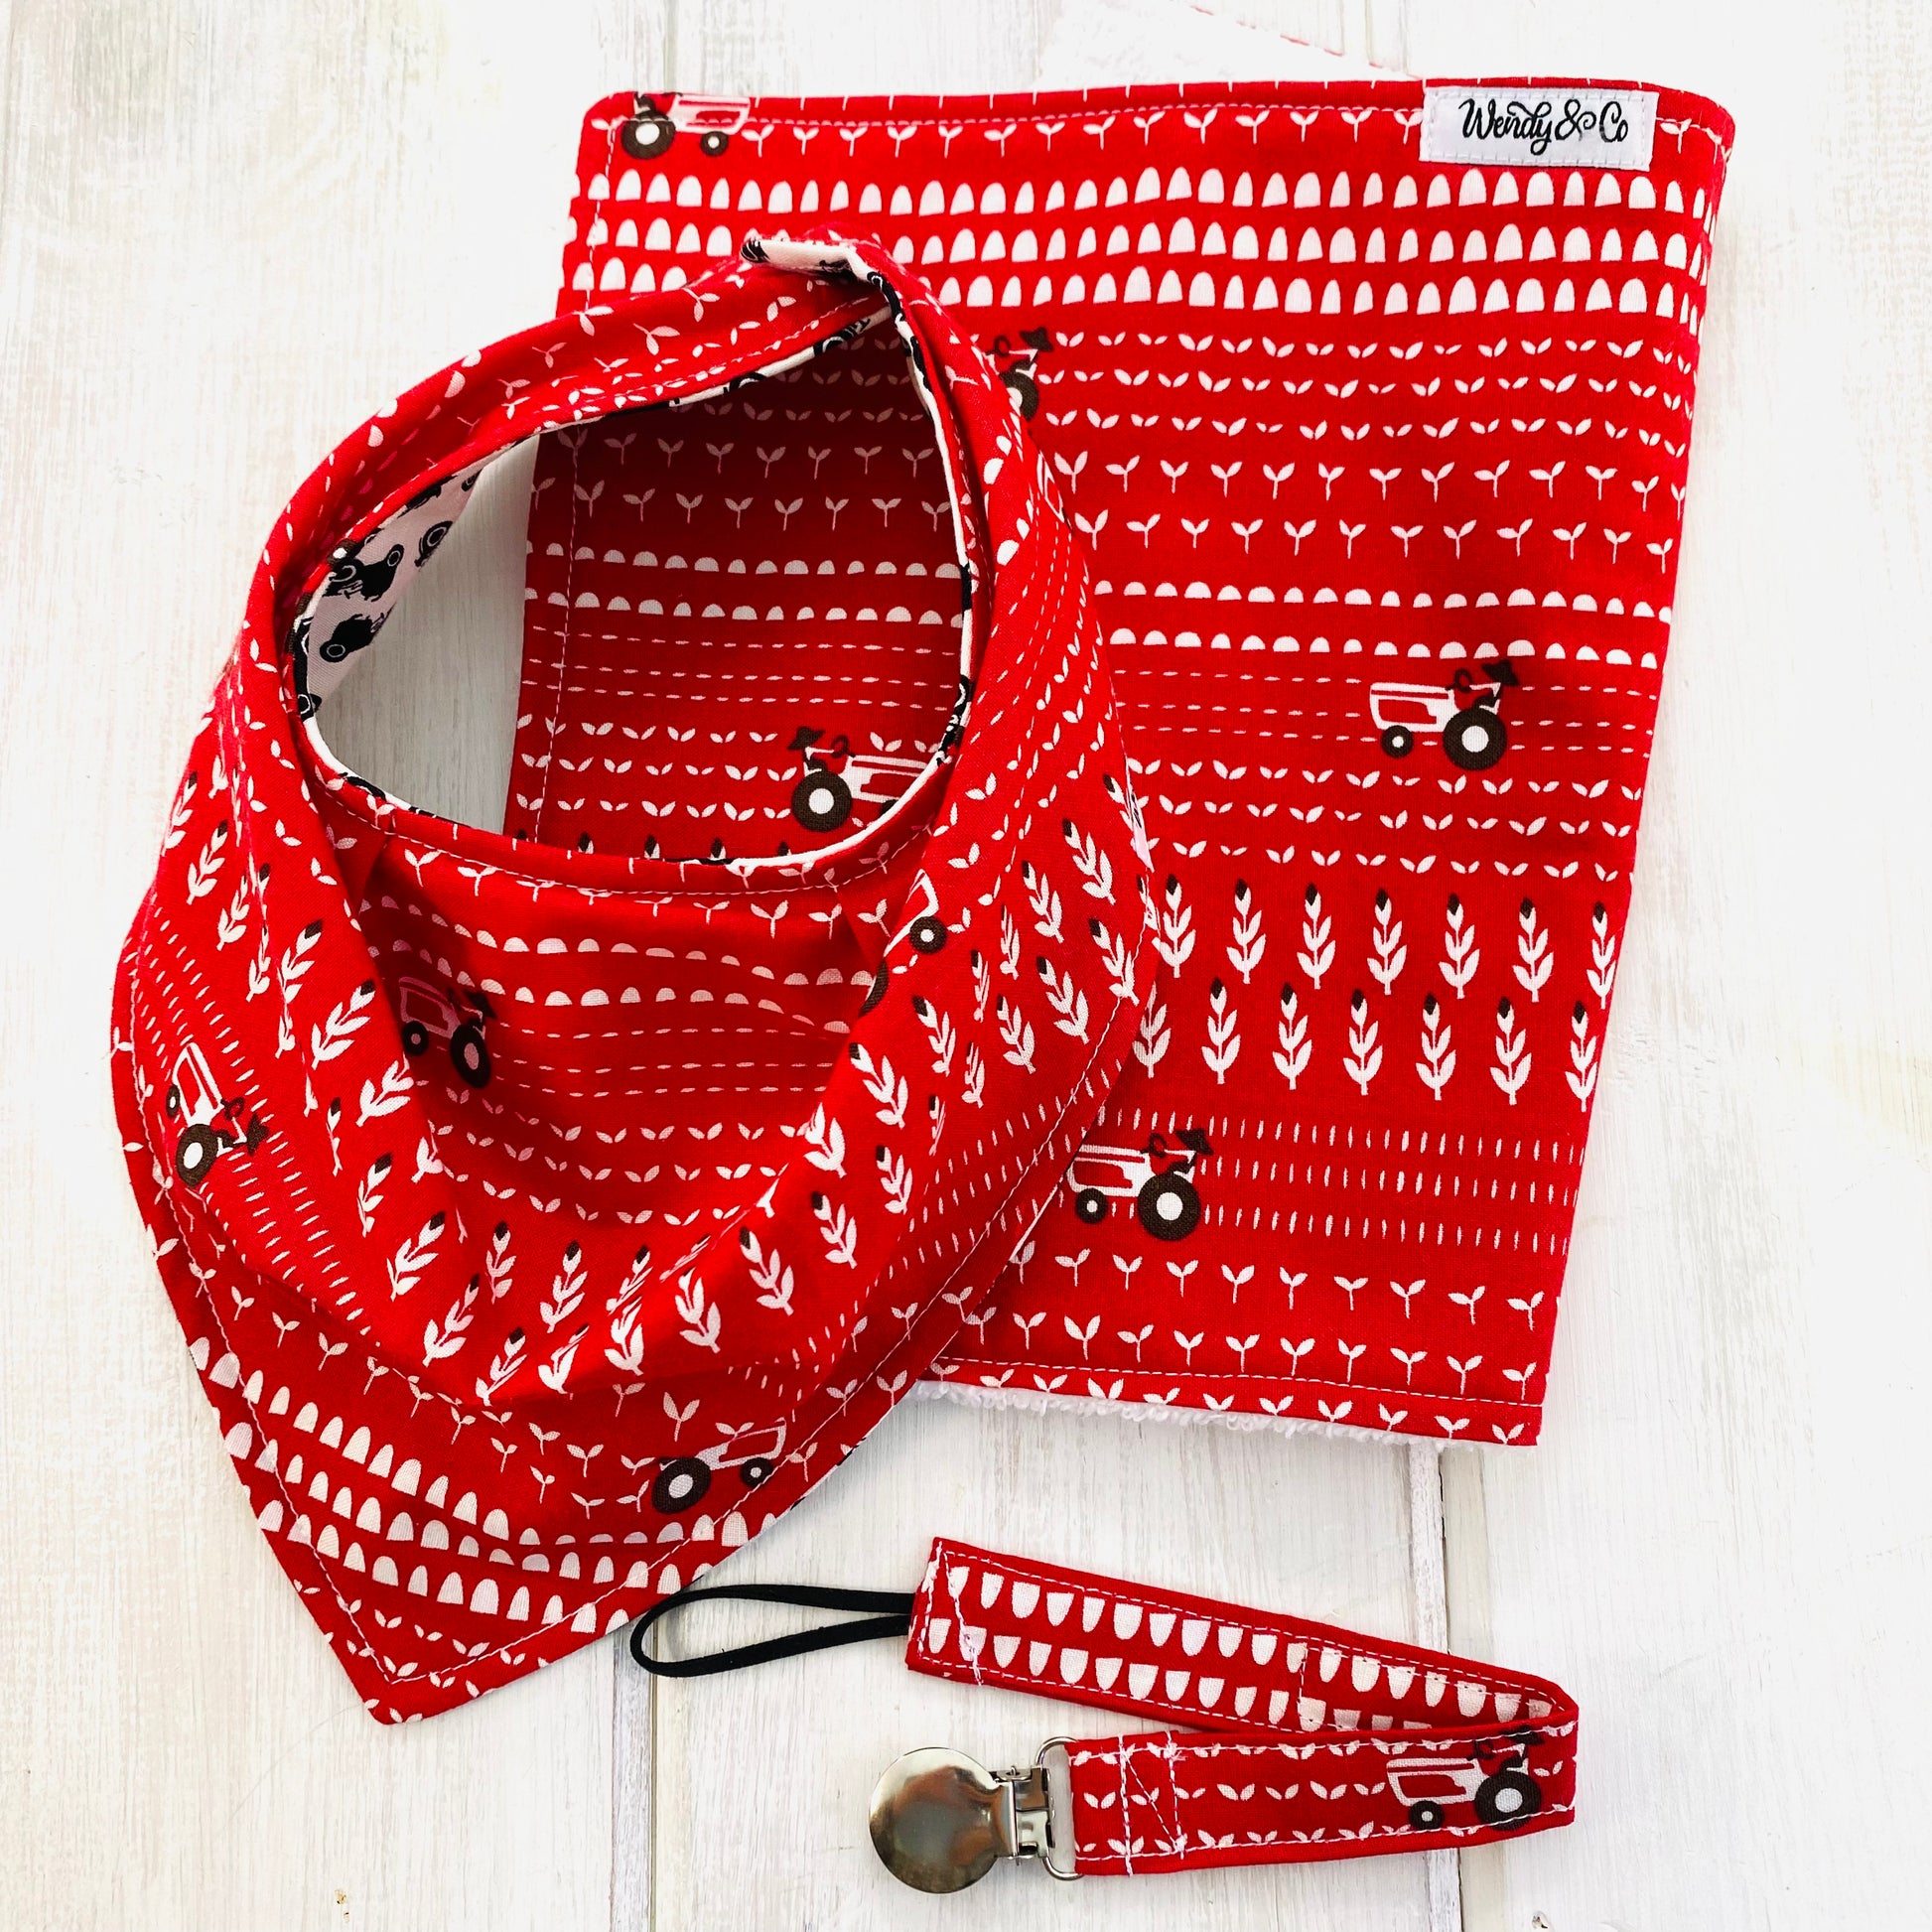 Bandana bib, pacifier clip and burp cloth in red, white and black fabric depicting a tractor plowing fields.